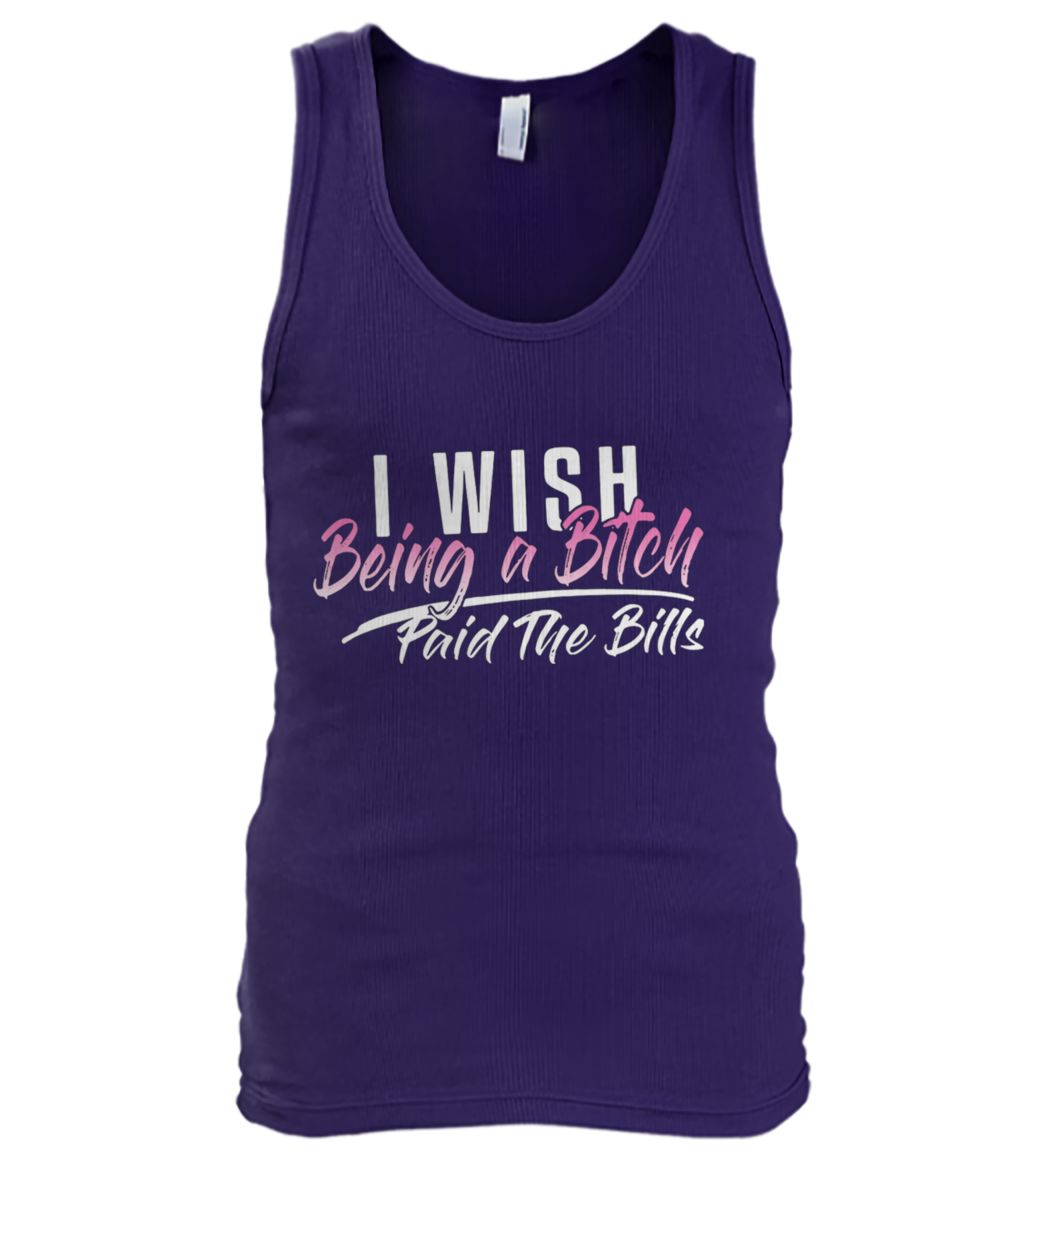 I wish being a bitch paid the bills men's tank top